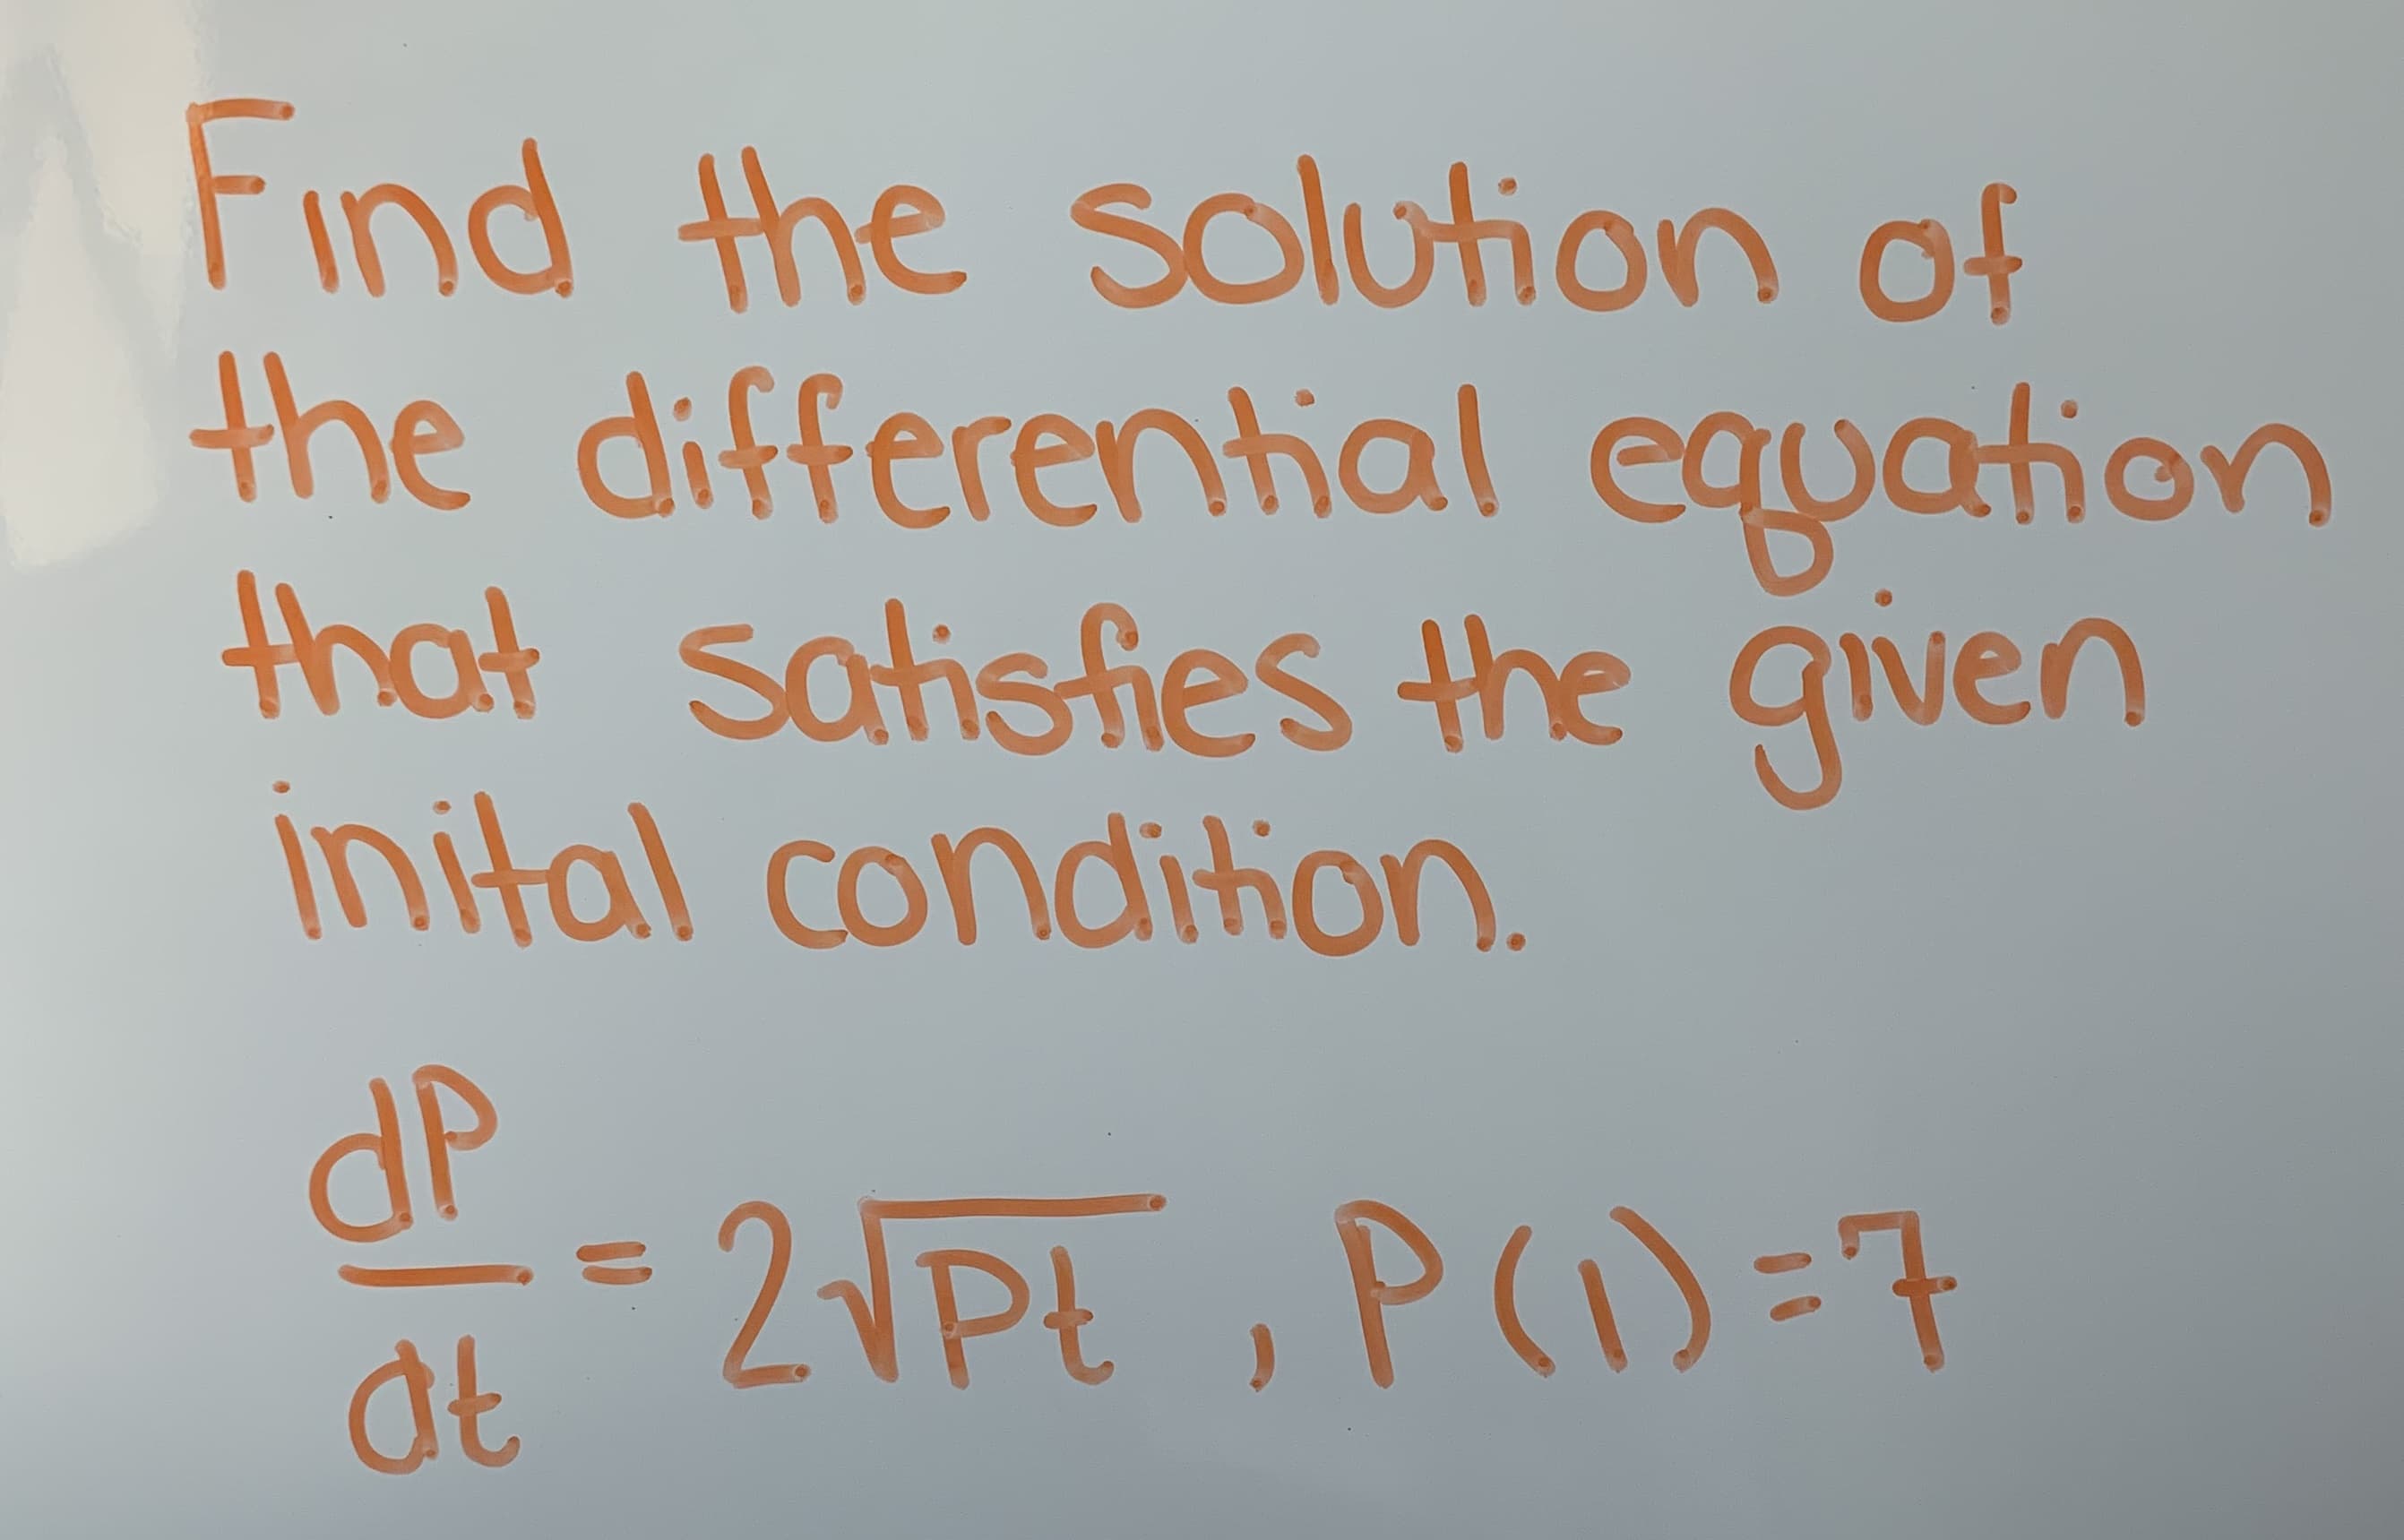 Find the solution of
the differenhal equahon
not Sothsfes the given
inital condiion
dP
at
